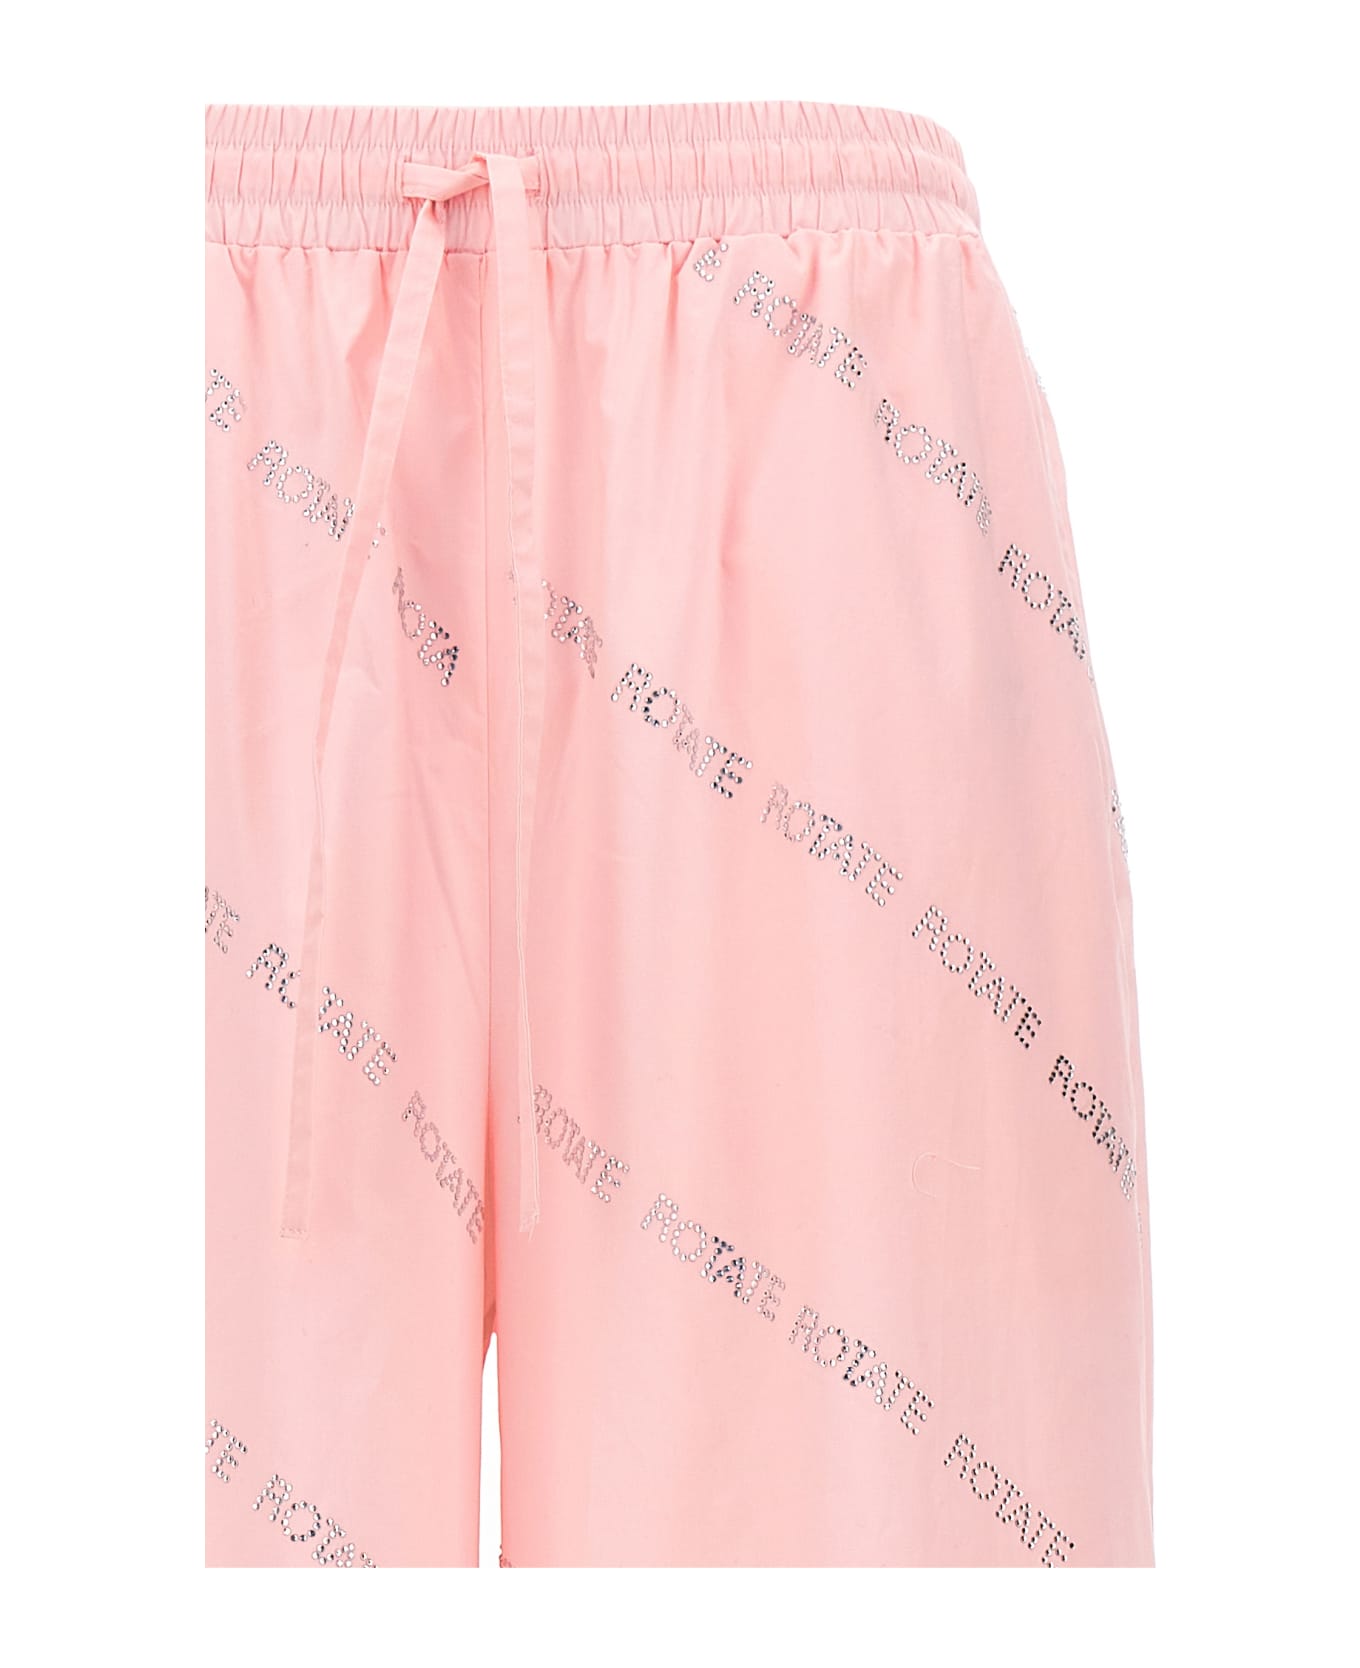 Rotate by Birger Christensen Sunday Capsule Crystal Pants - Pink